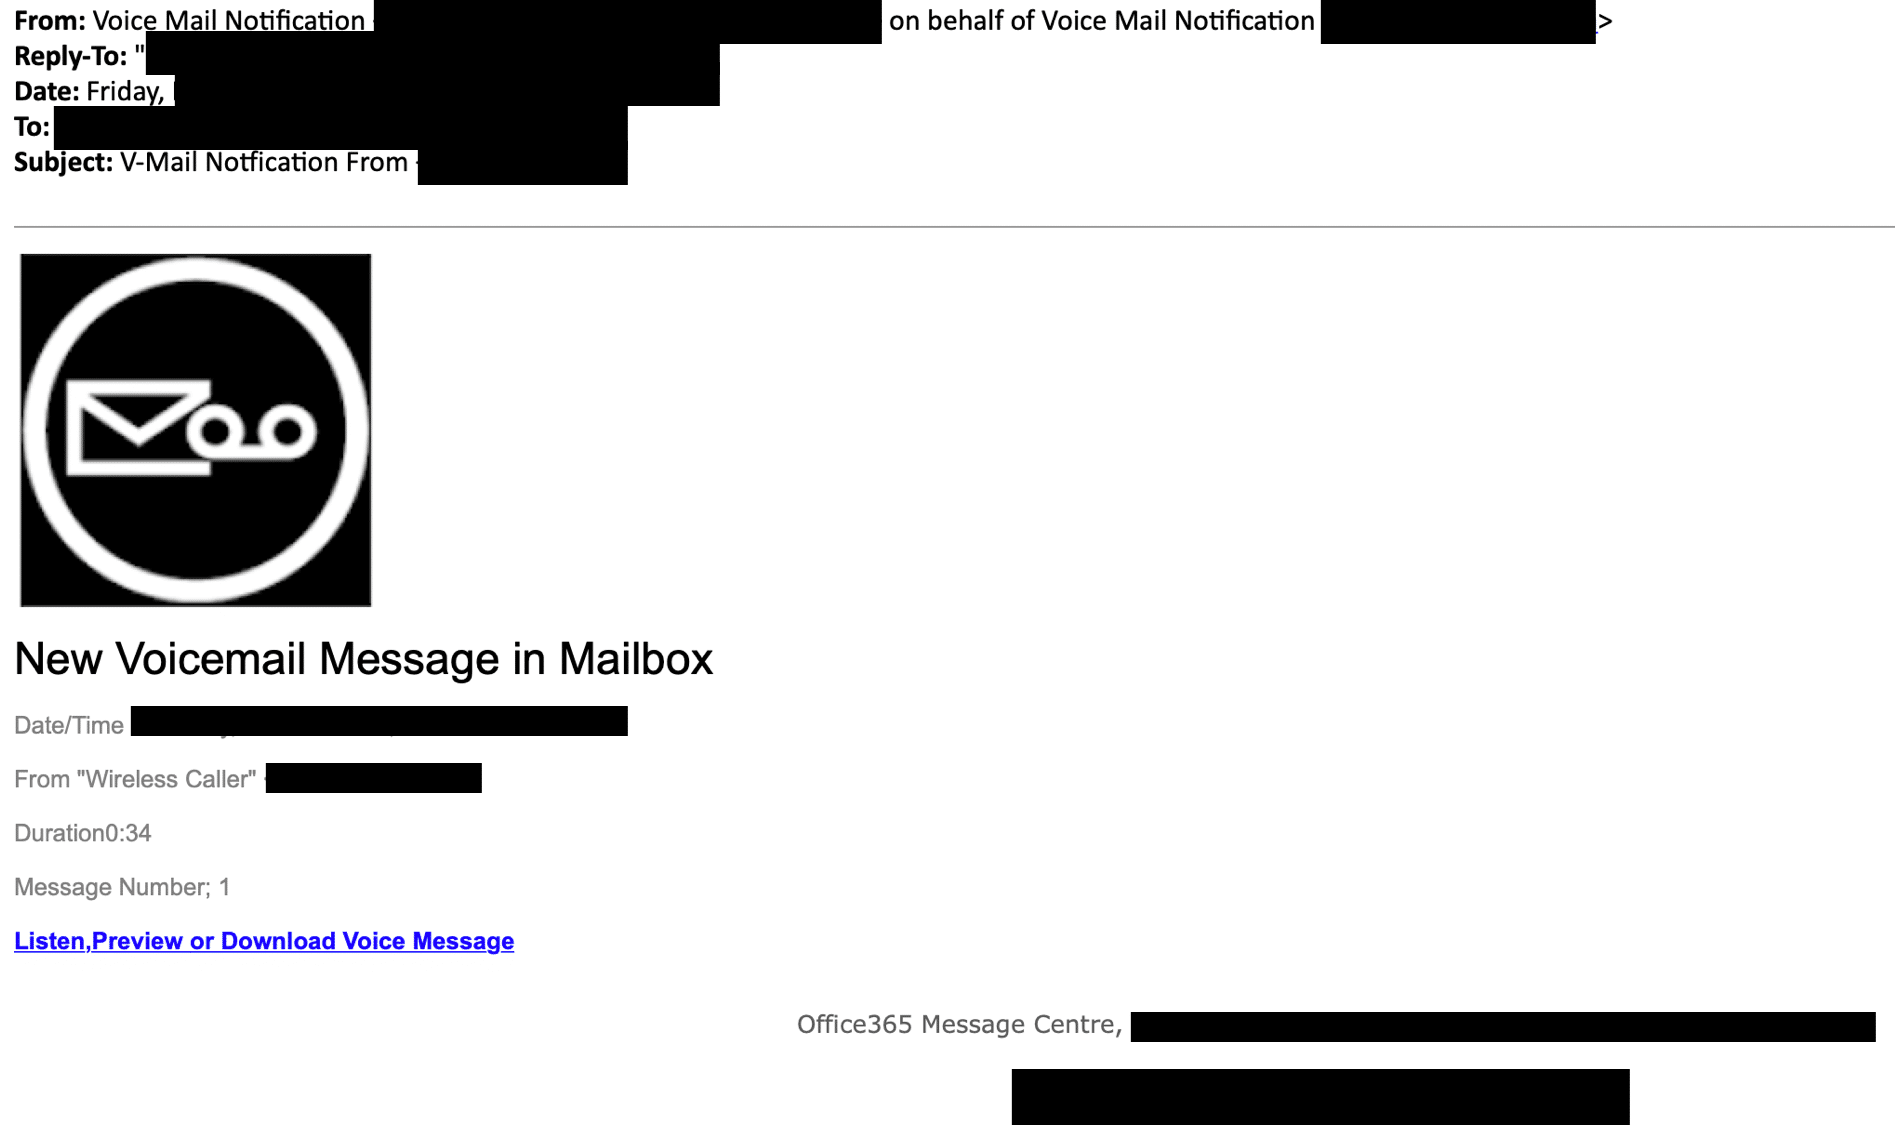 redacted voicemail message phishing email example